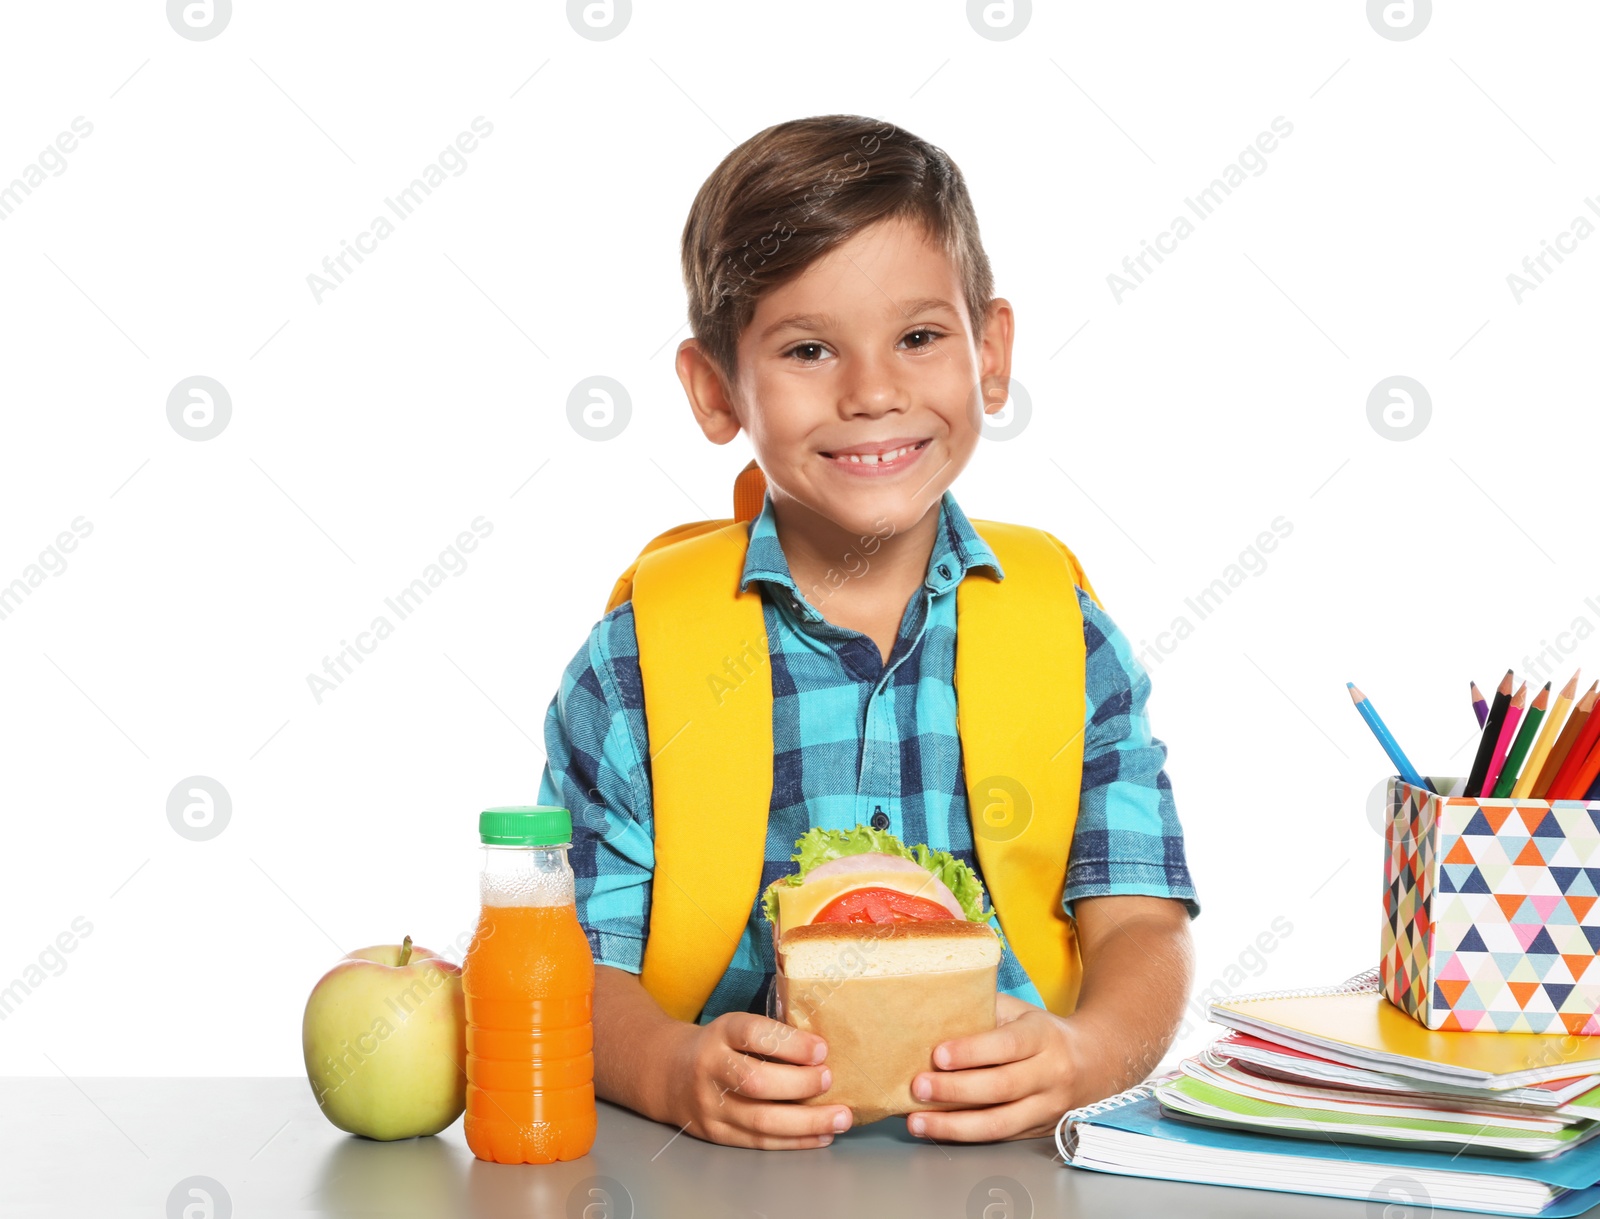 Photo of Schoolboy with healthy food and backpack sitting at table on white background